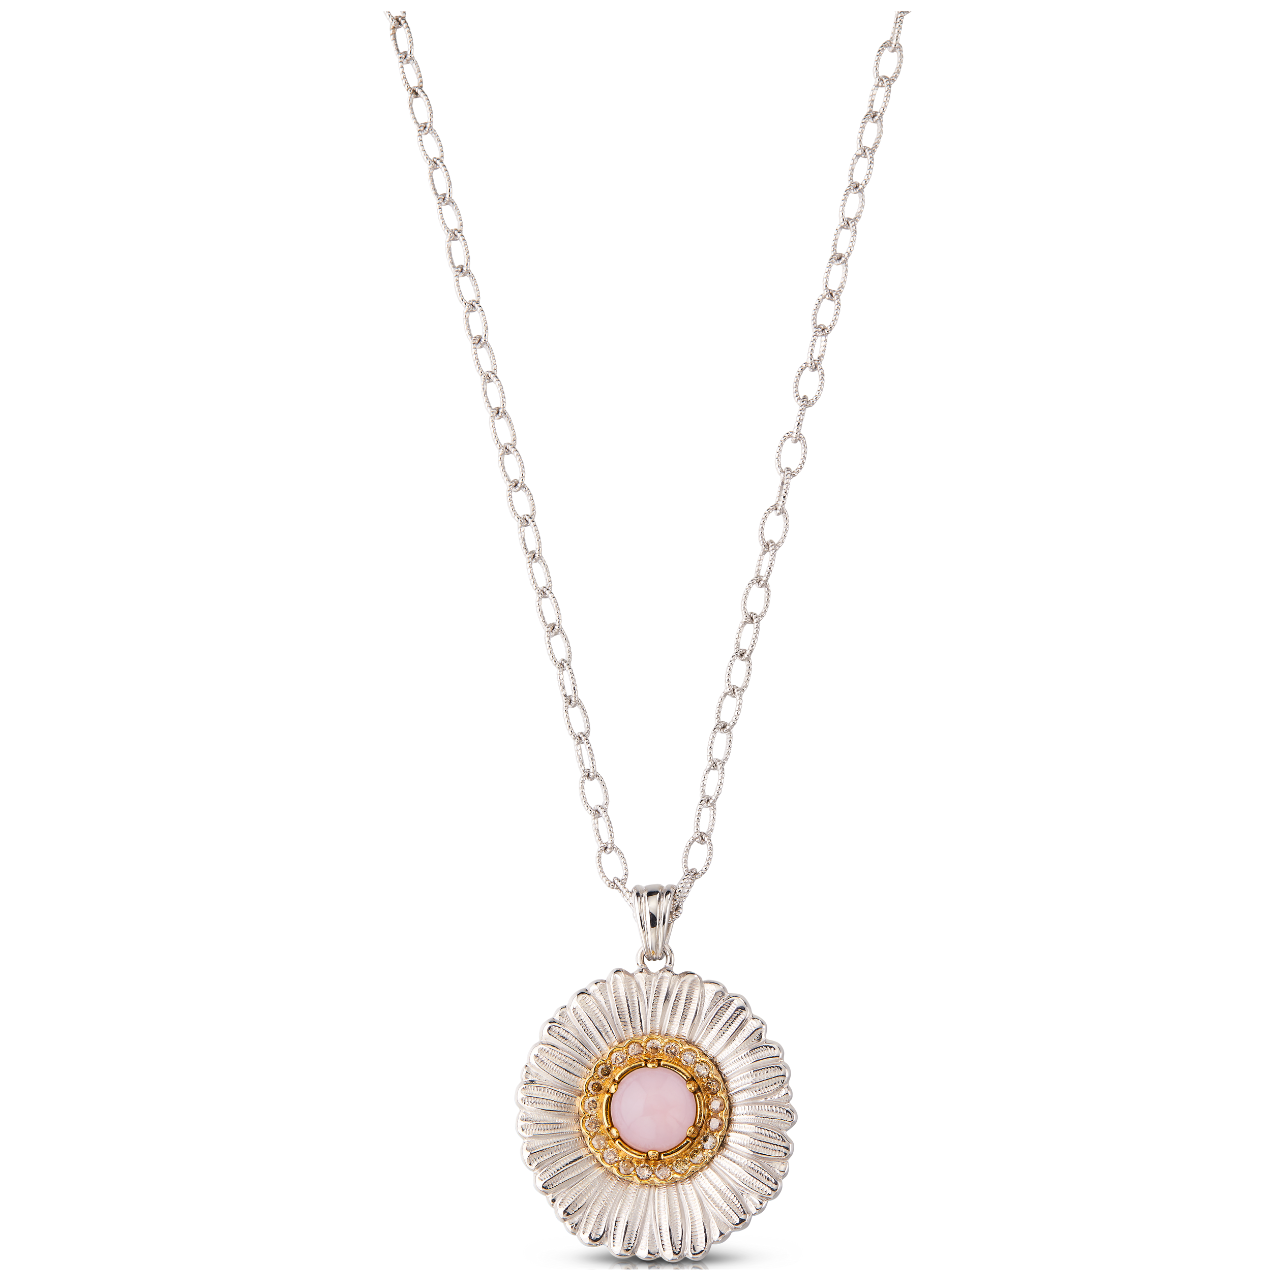 Buccellati Blossoms color pendant with pink opal stone